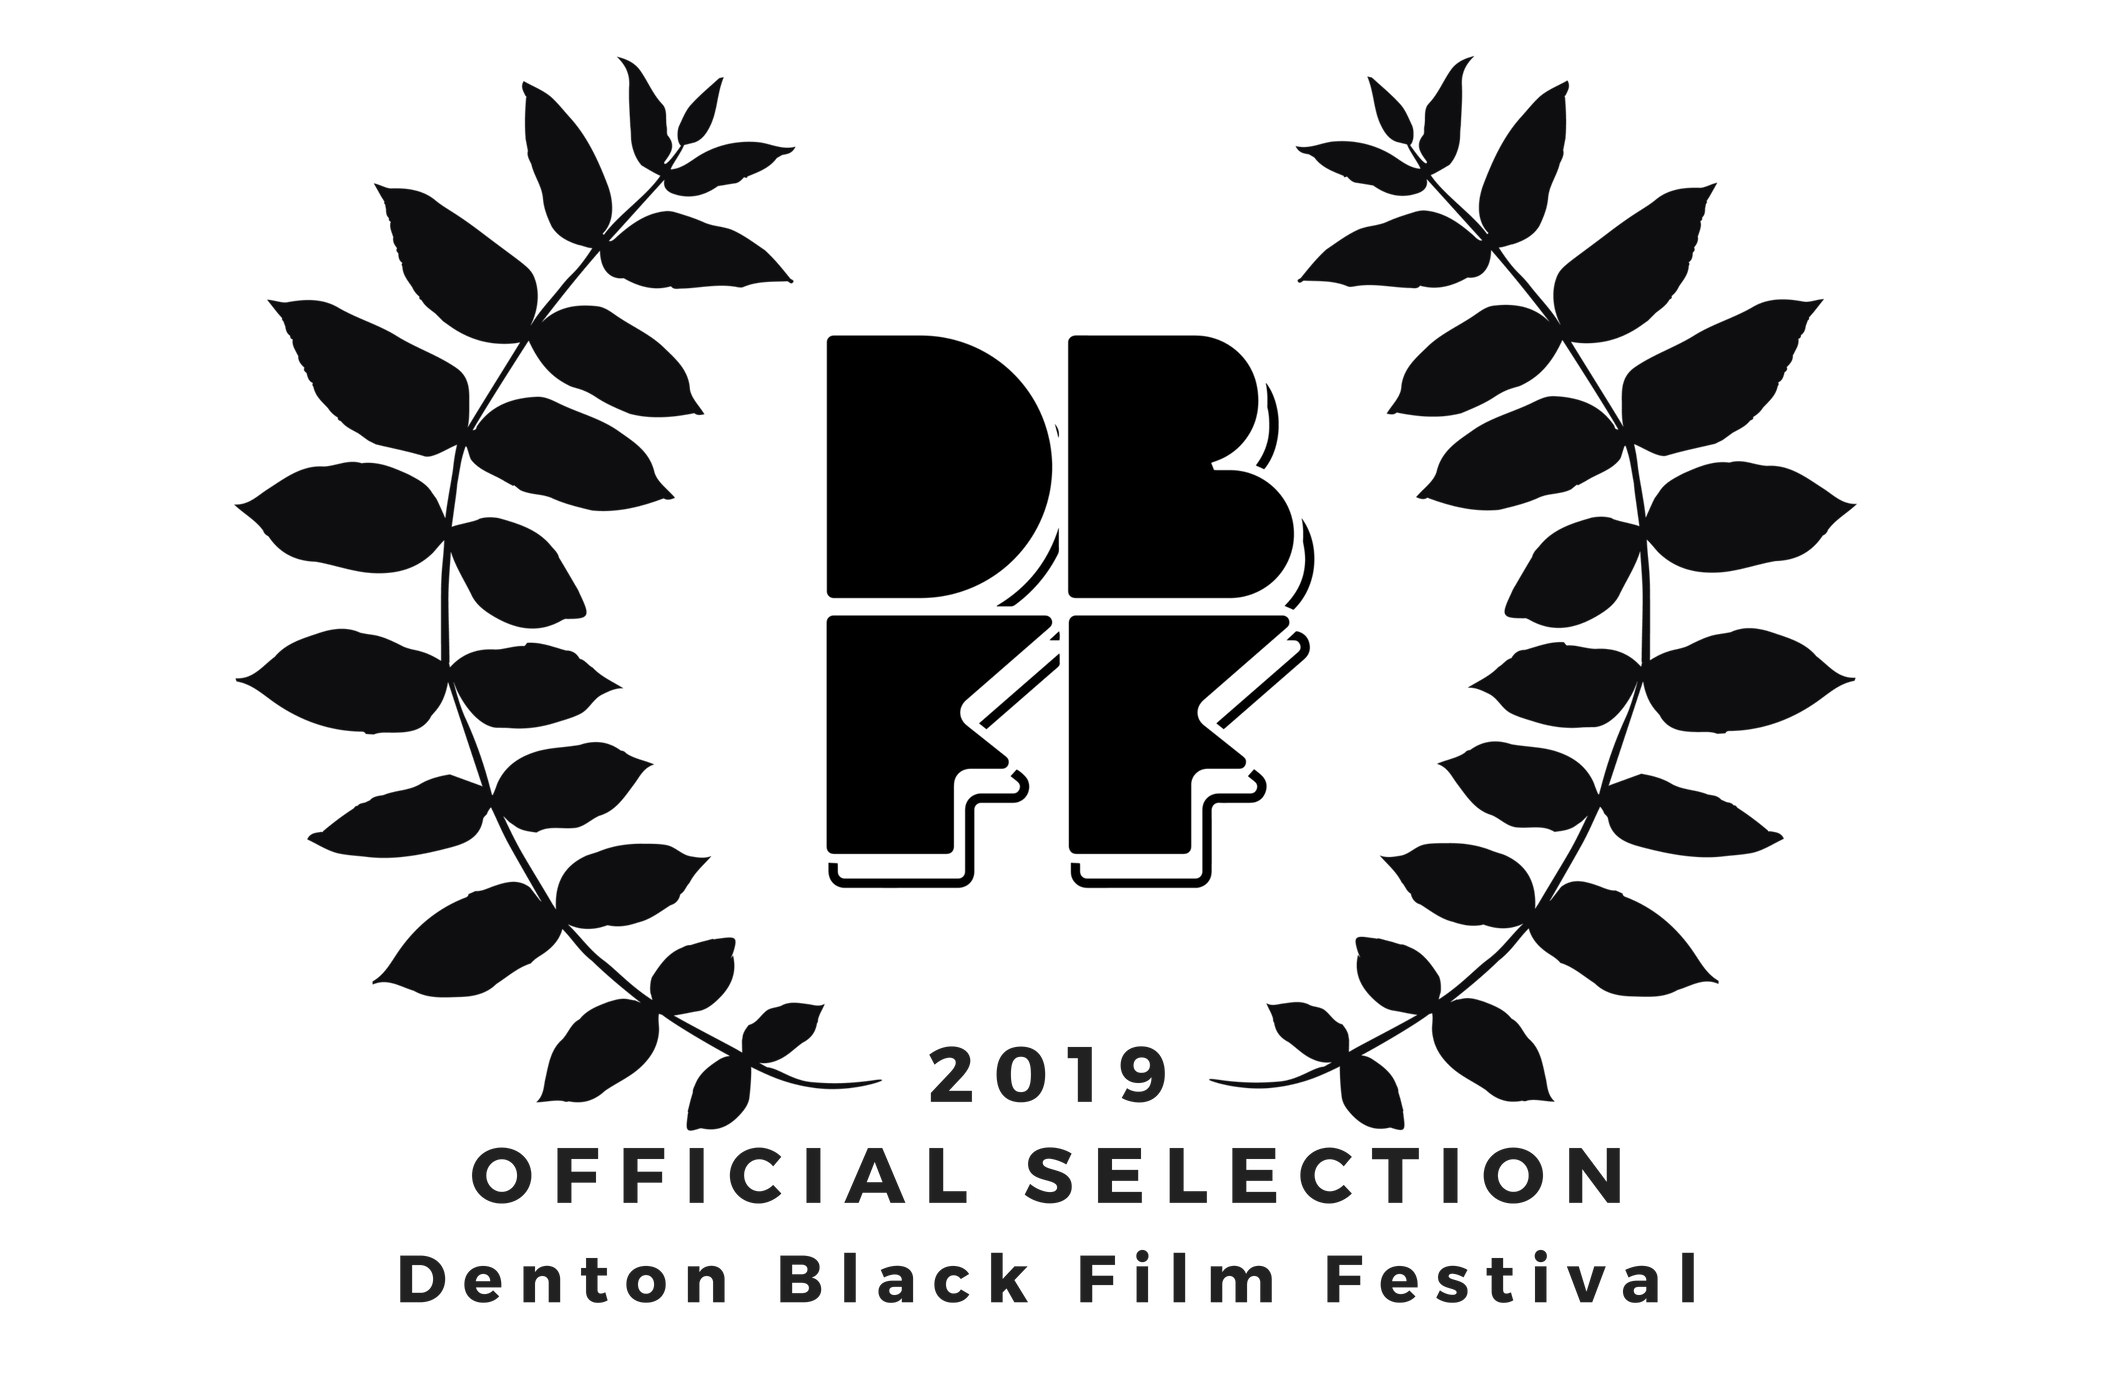 DBFF_OfficialSelection2019_Black[61847].png